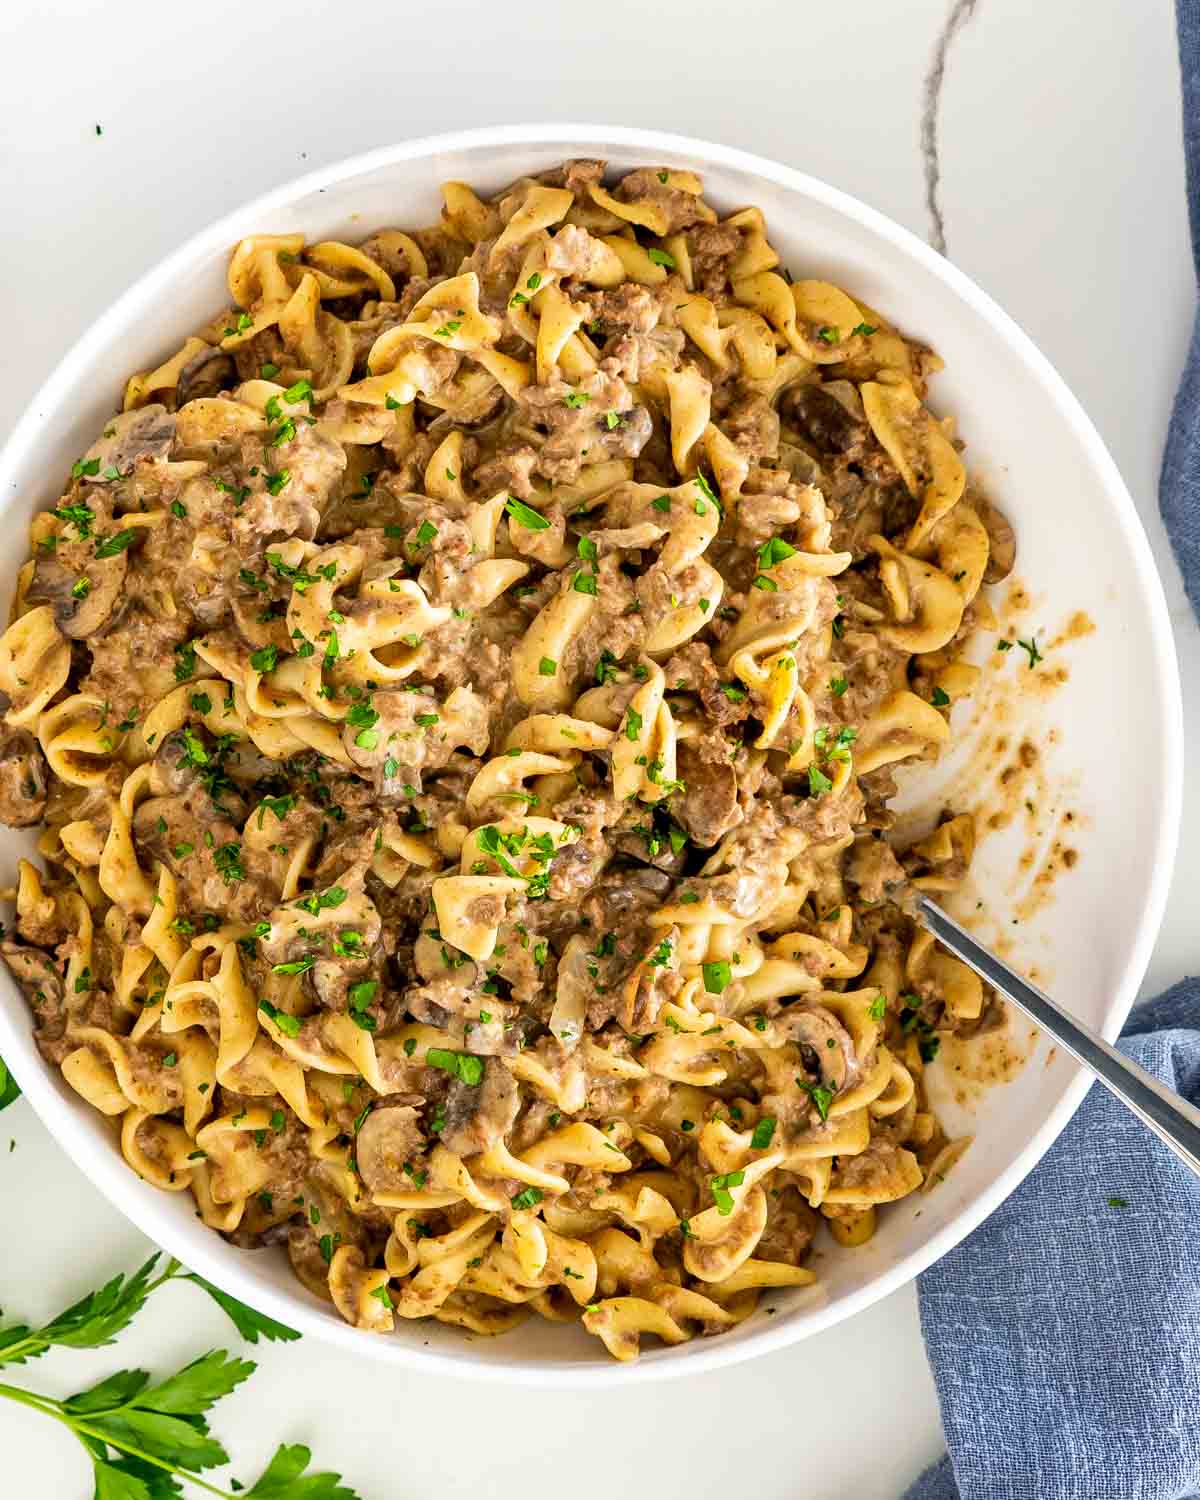 beef stroganoff in a white bowl with a serving spoon.